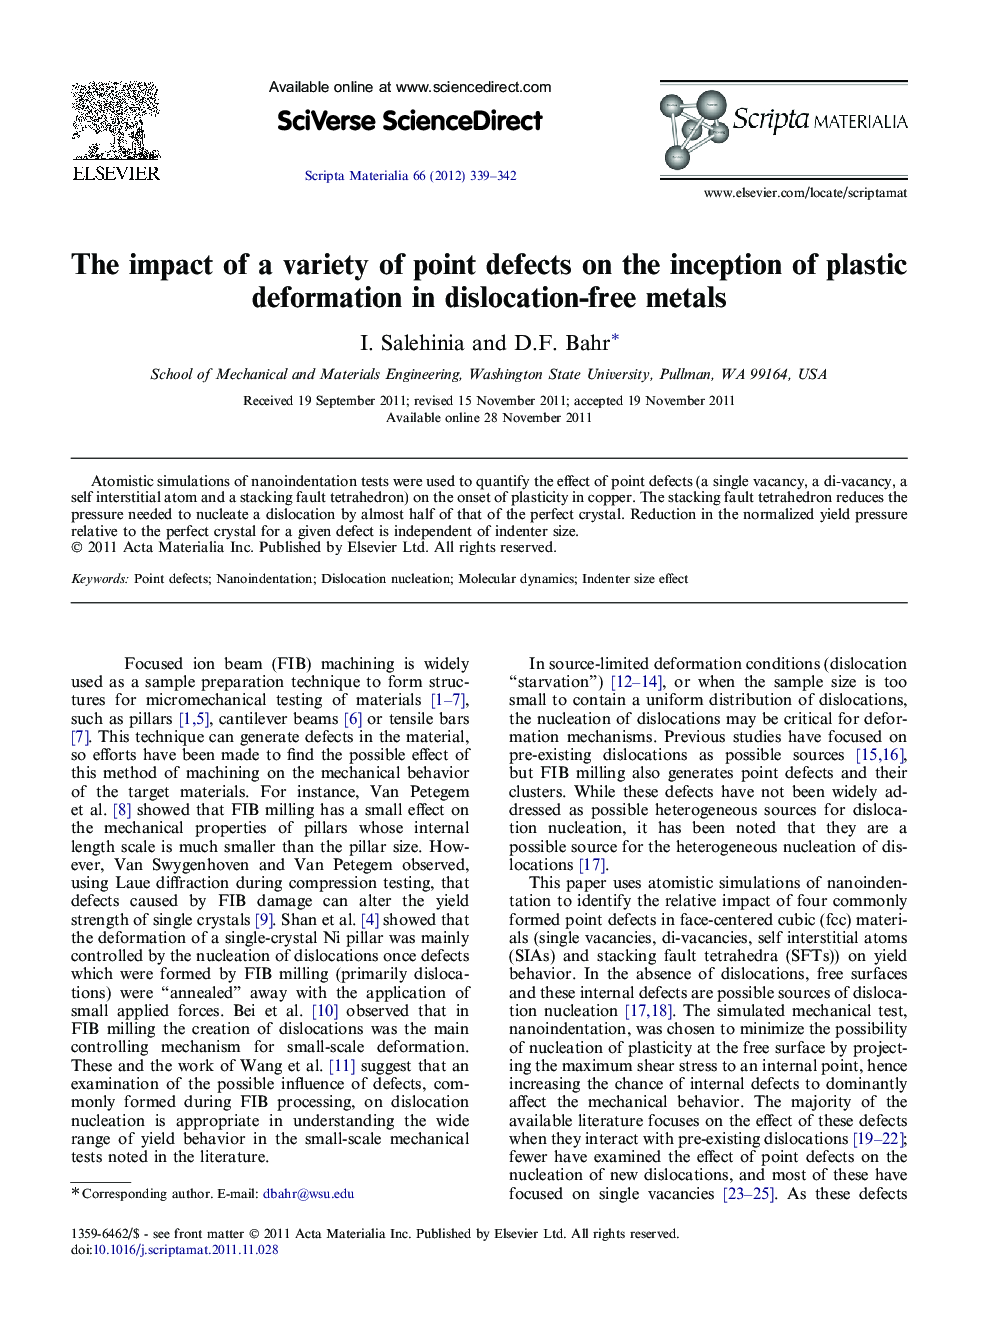 The impact of a variety of point defects on the inception of plastic deformation in dislocation-free metals